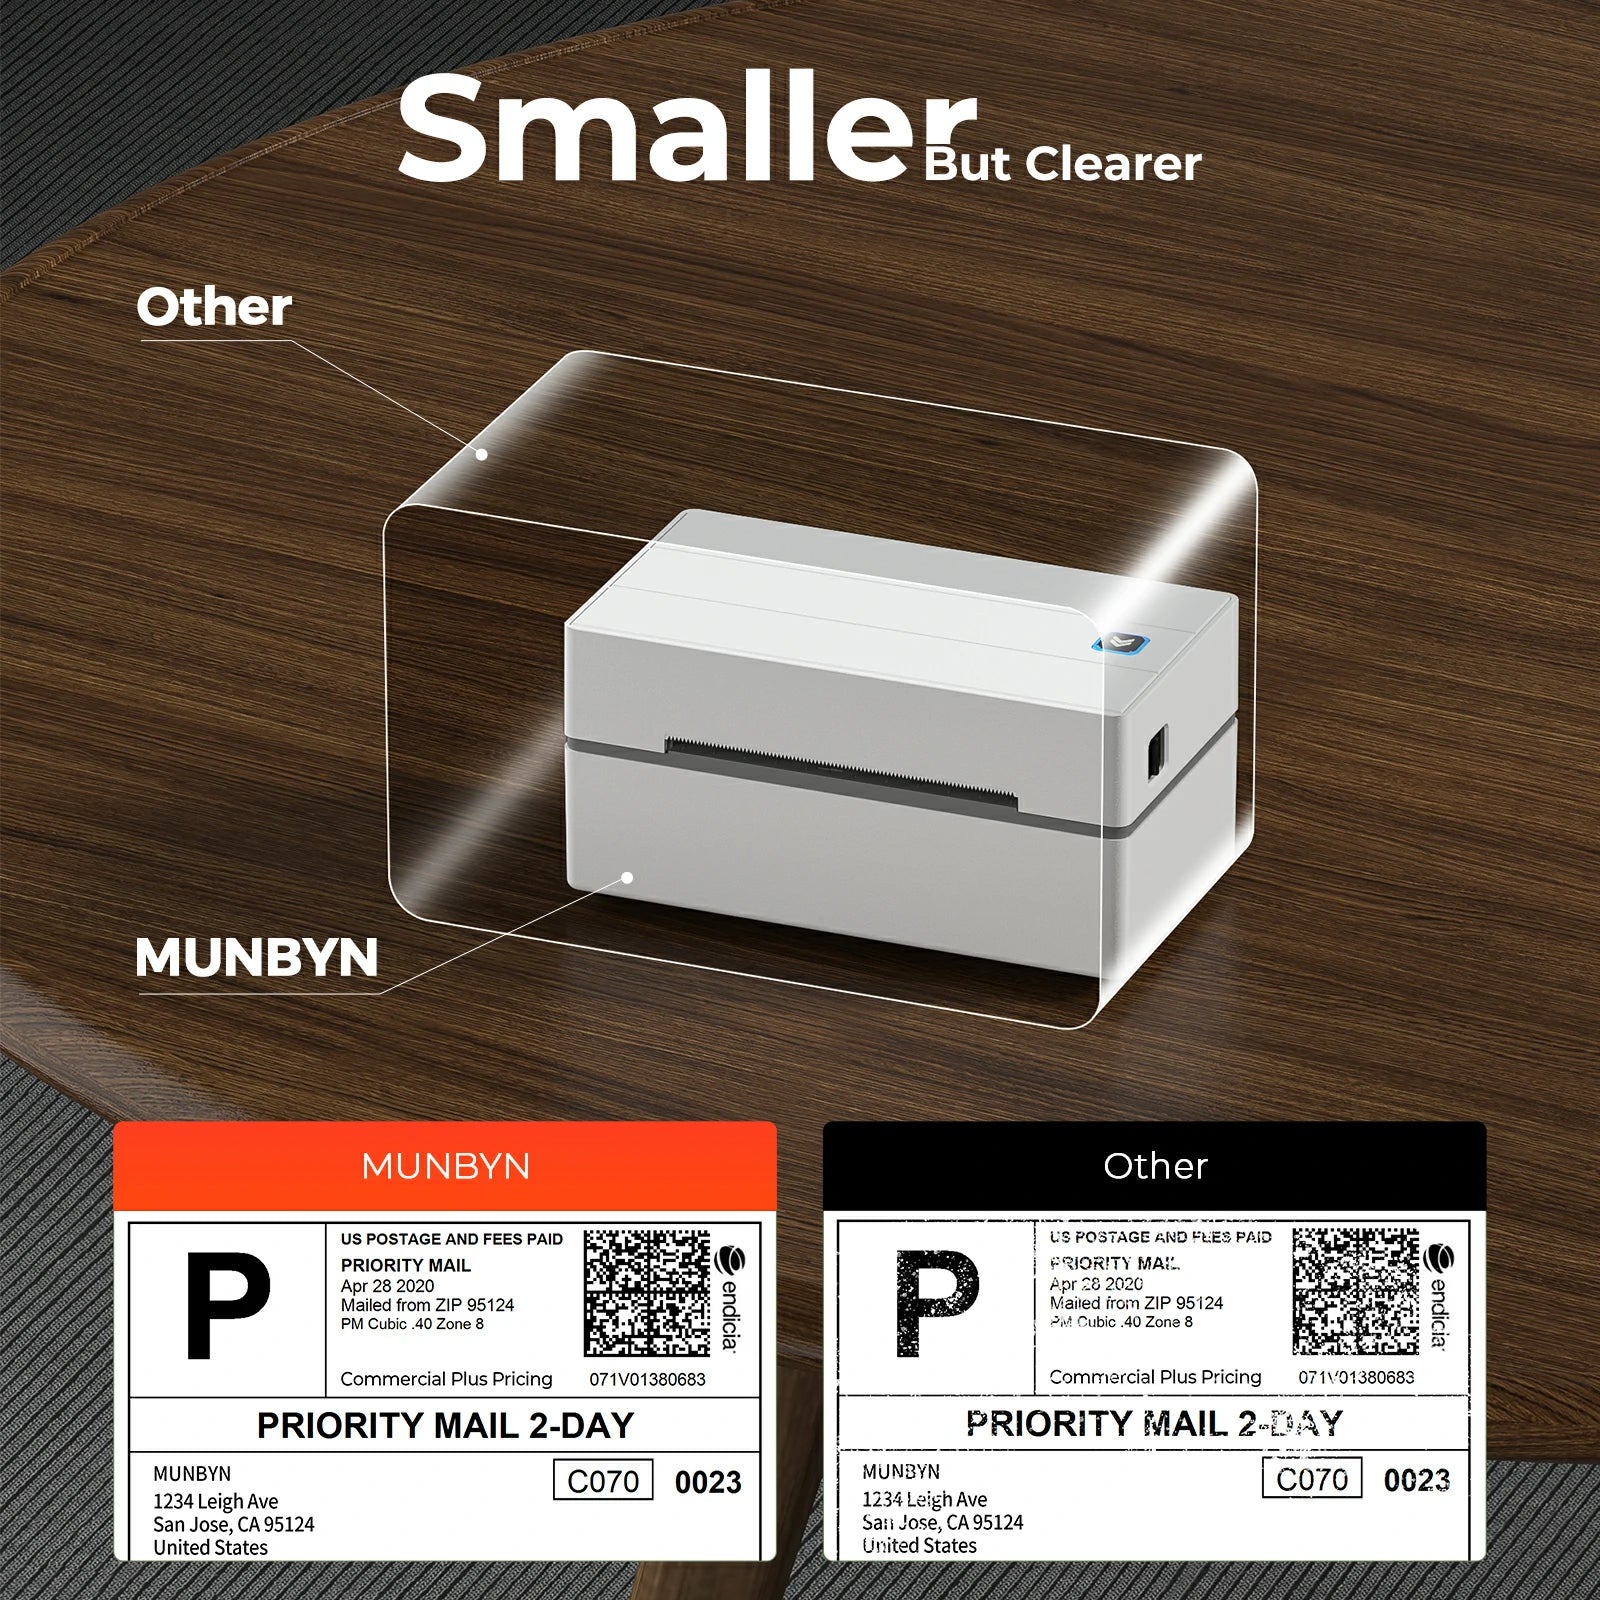 MUNBYN P130B Bluetooth label printer is smaller and prints more clearly than other thermal printers.